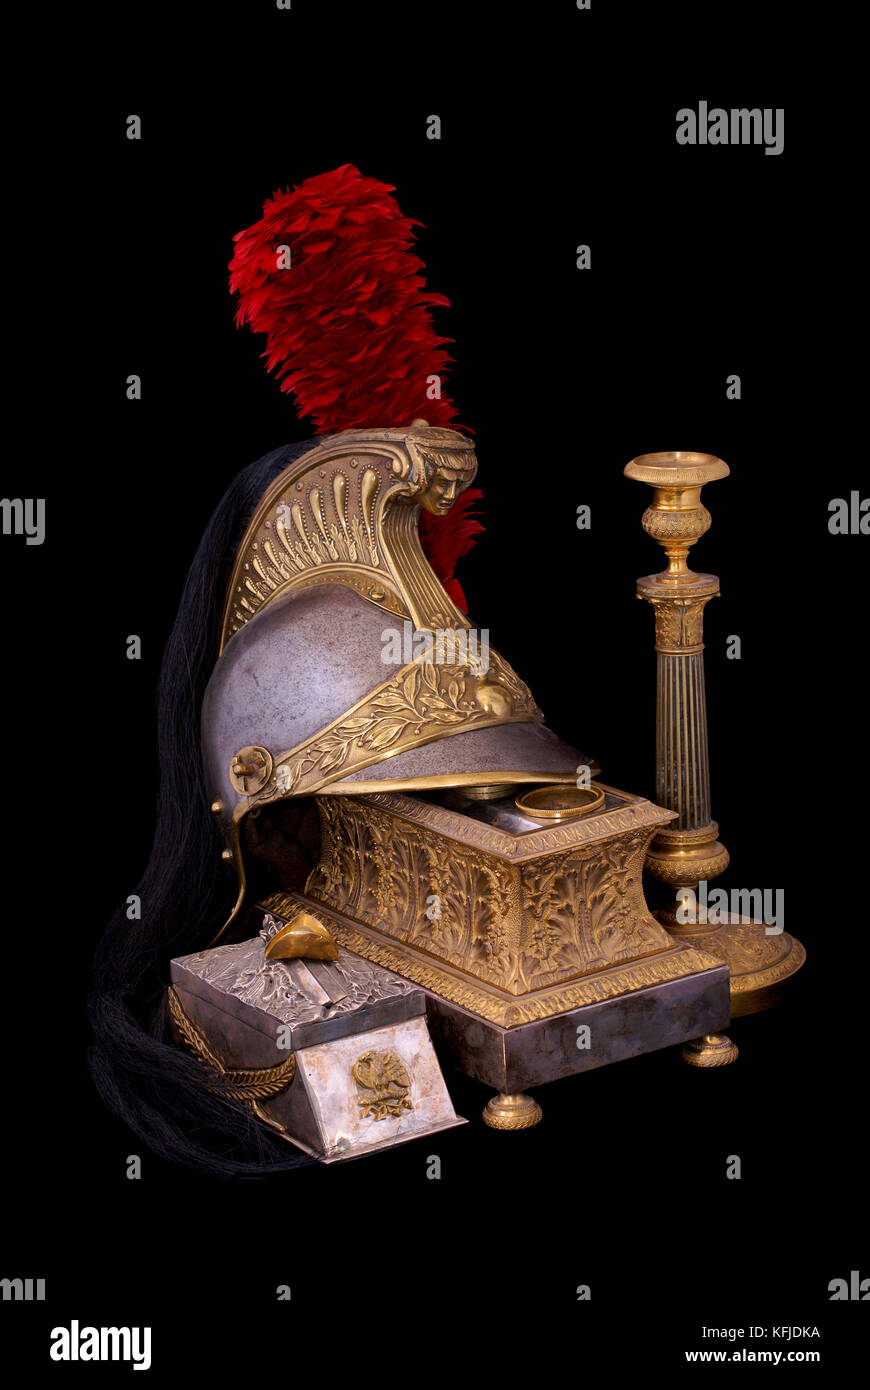 Composition with French cuirassier helmet (1836), bronze inkstand with gilding (1830) and old bronze candlestick (candleholder). Path on dark backgrou Stock Photo